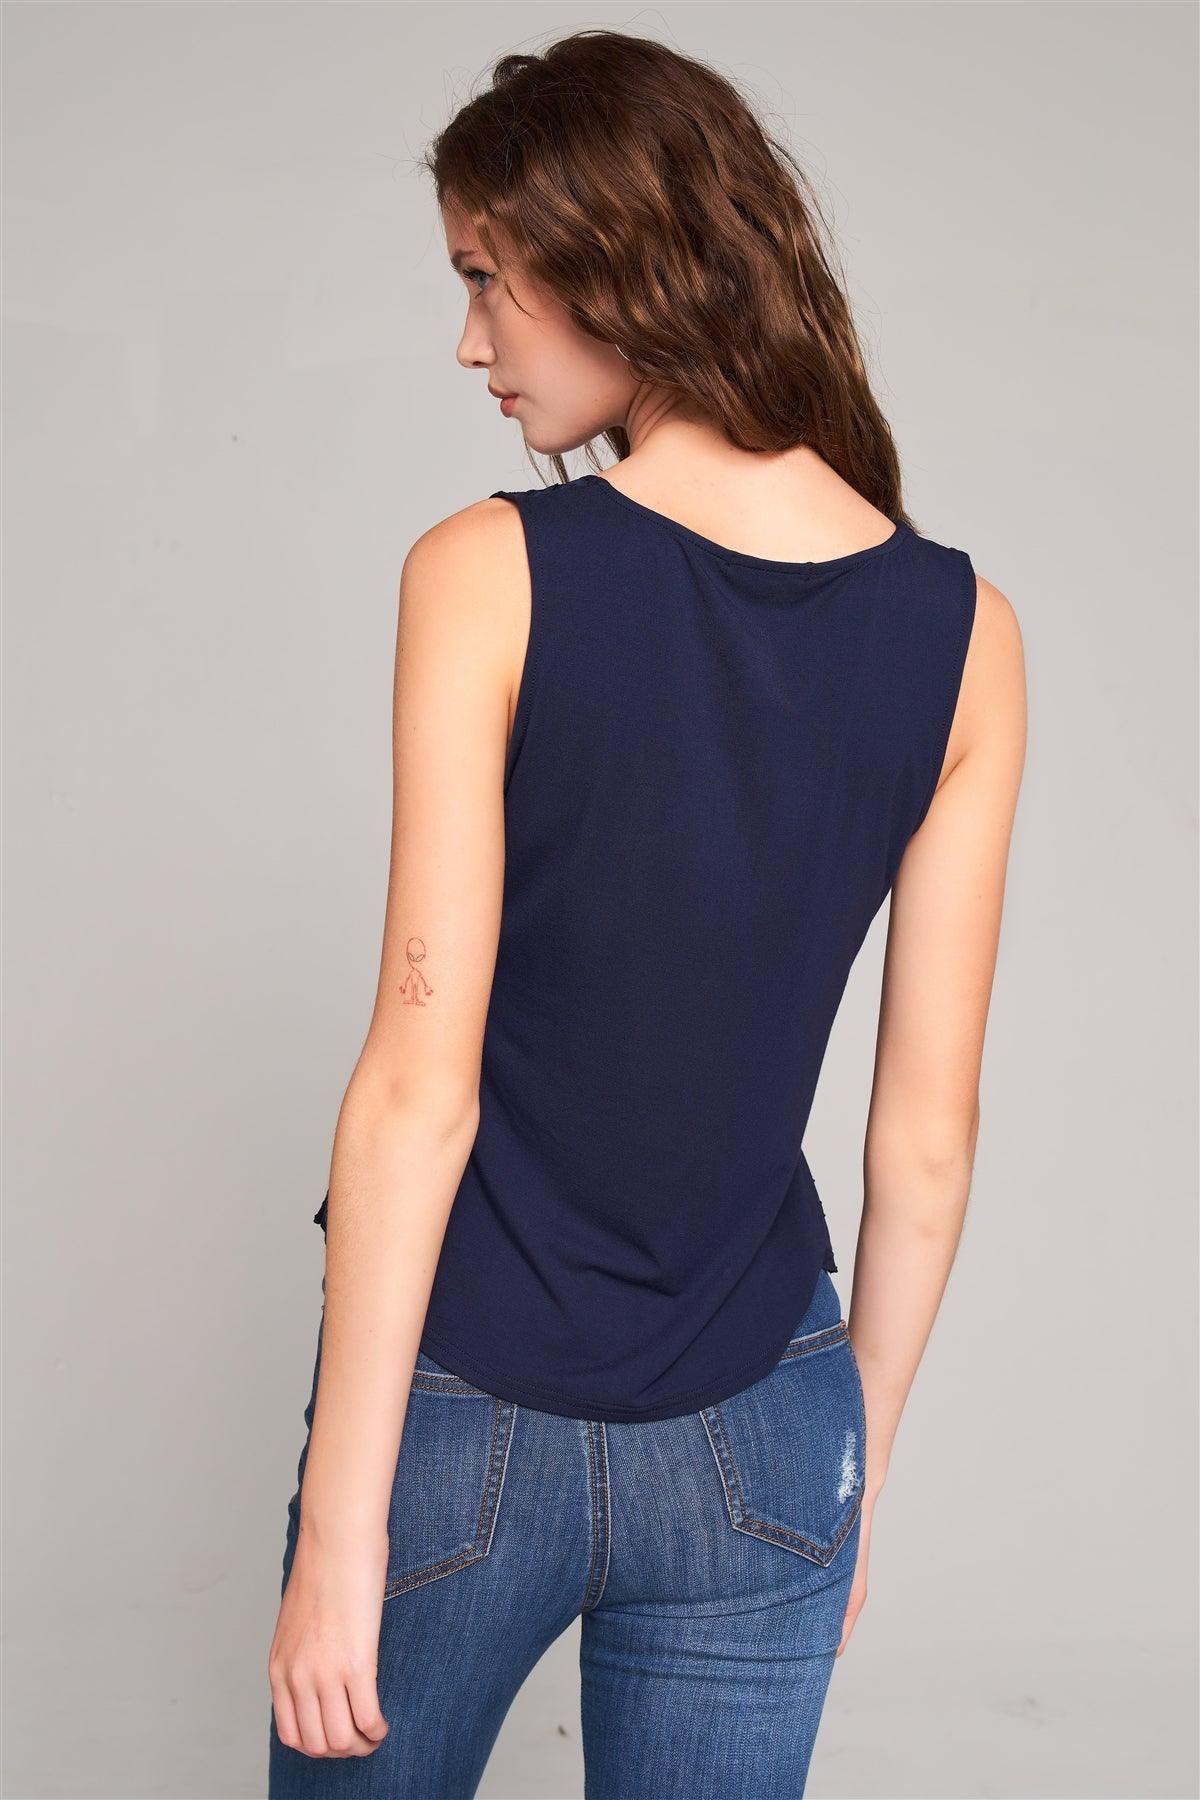 Navy Blue Sleeveless Geometric Embroidered Insert Front Trim V-Cut Neck Relaxed Top /2-3-2-1